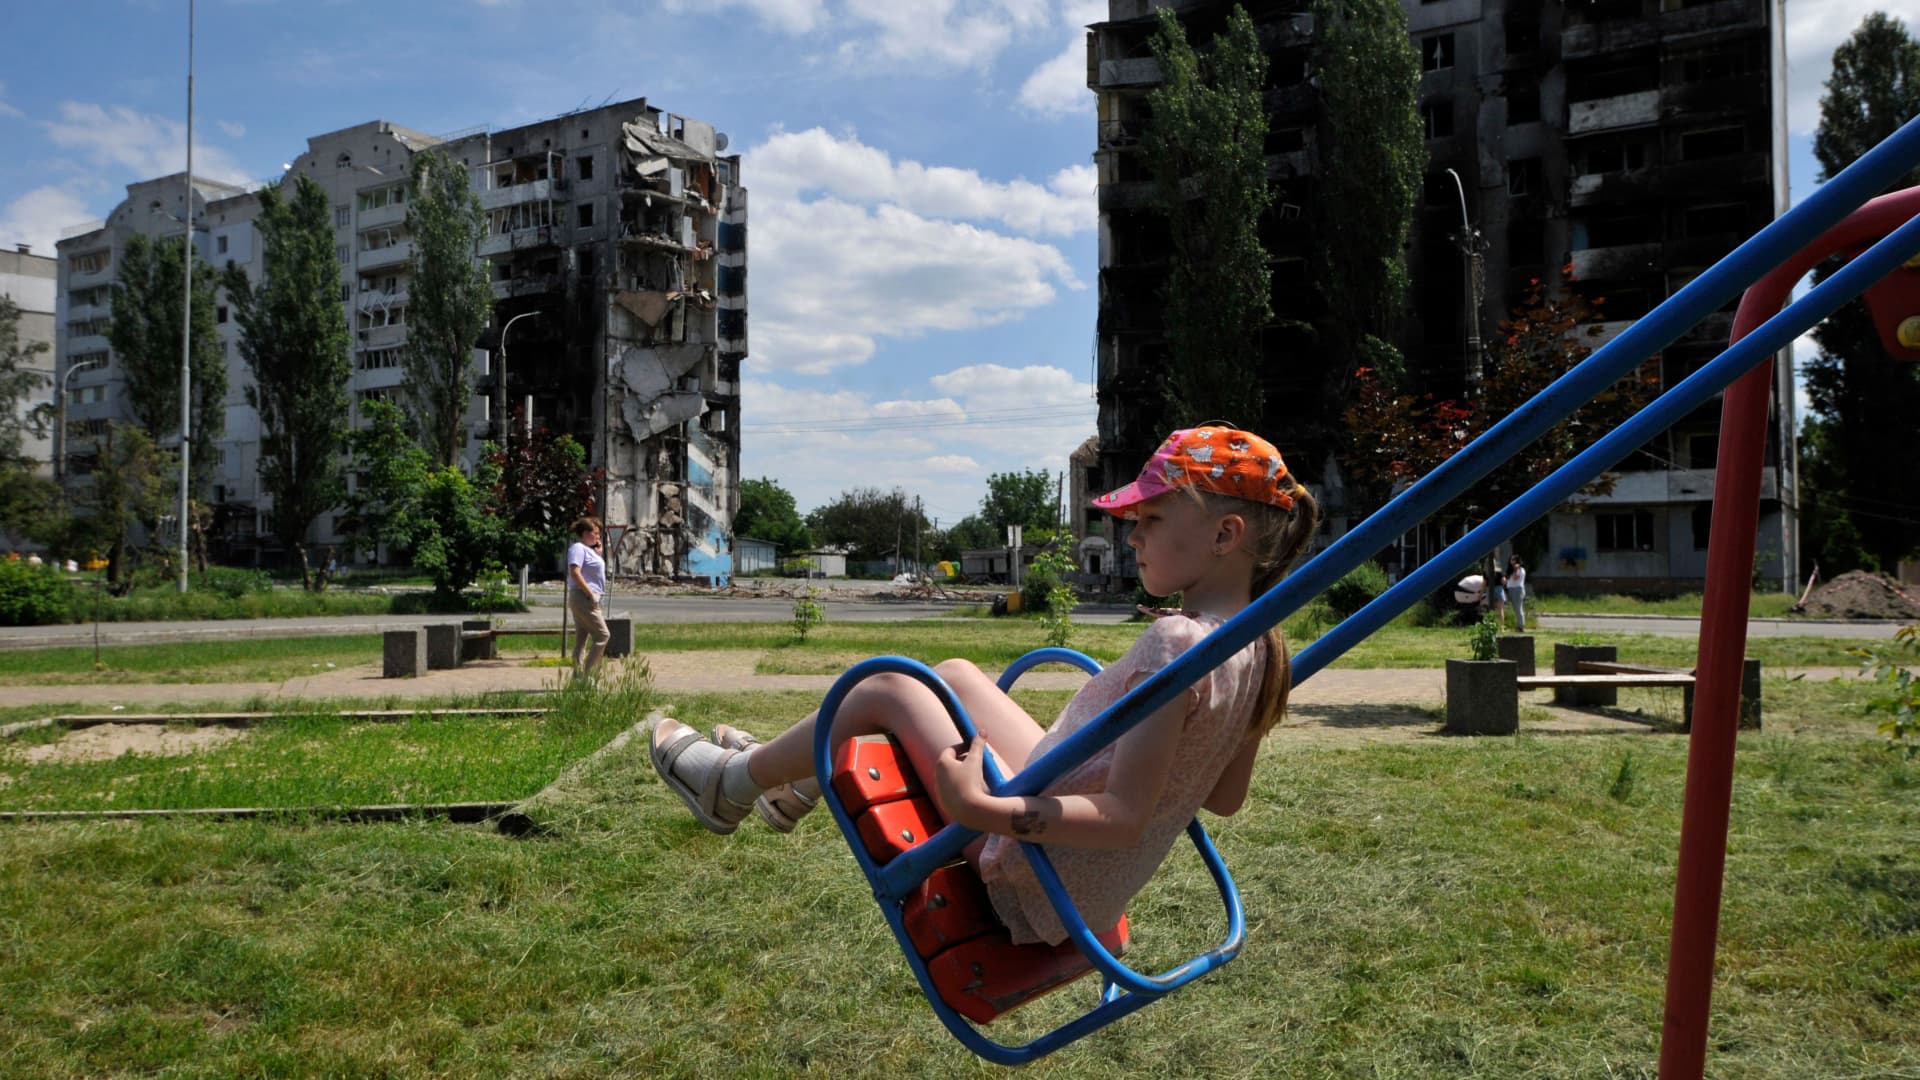 A girl rides a swing on a playground in front of a destroyed residential building in the town of Borodyanka on June 7, 2022, amid the Russian invasion of Ukraine.